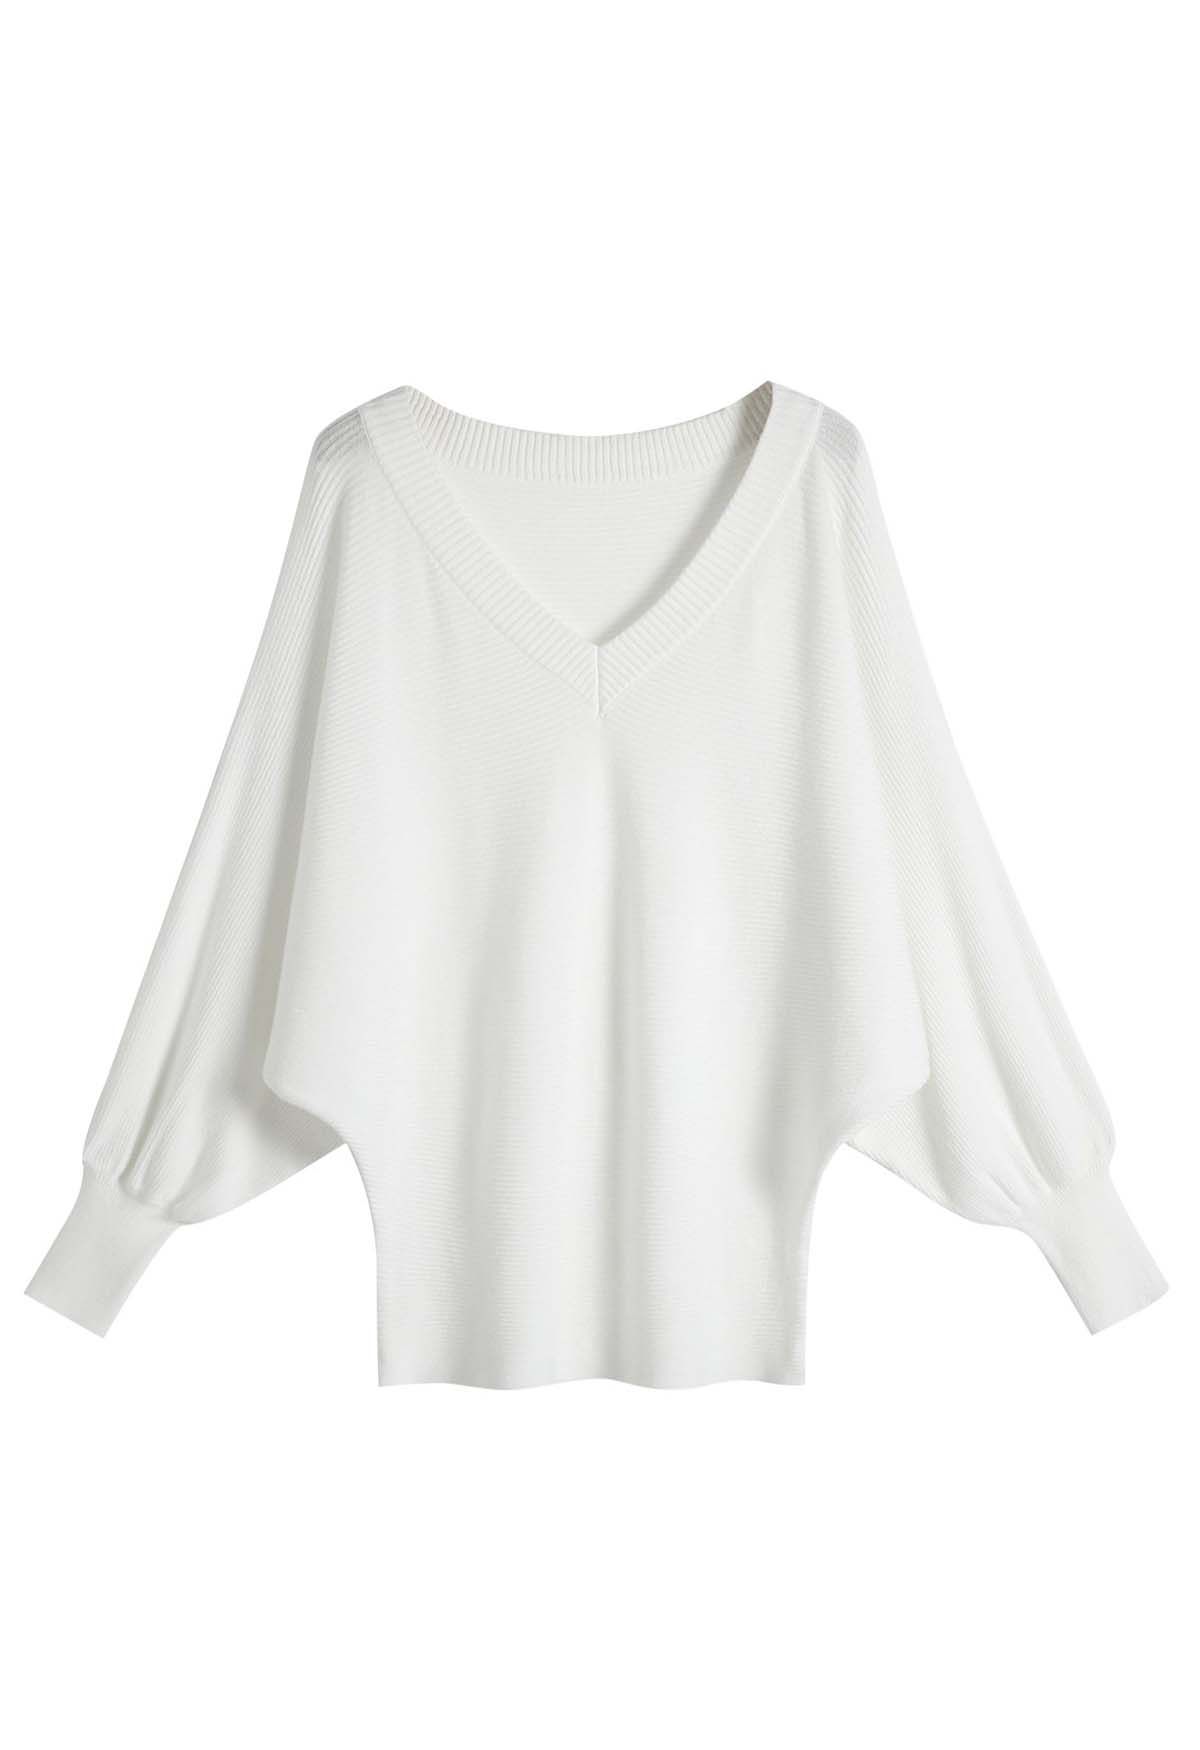 V-Neck Batwing Sleeves Pullover Knit Sweater in White - Retro, Indie ...